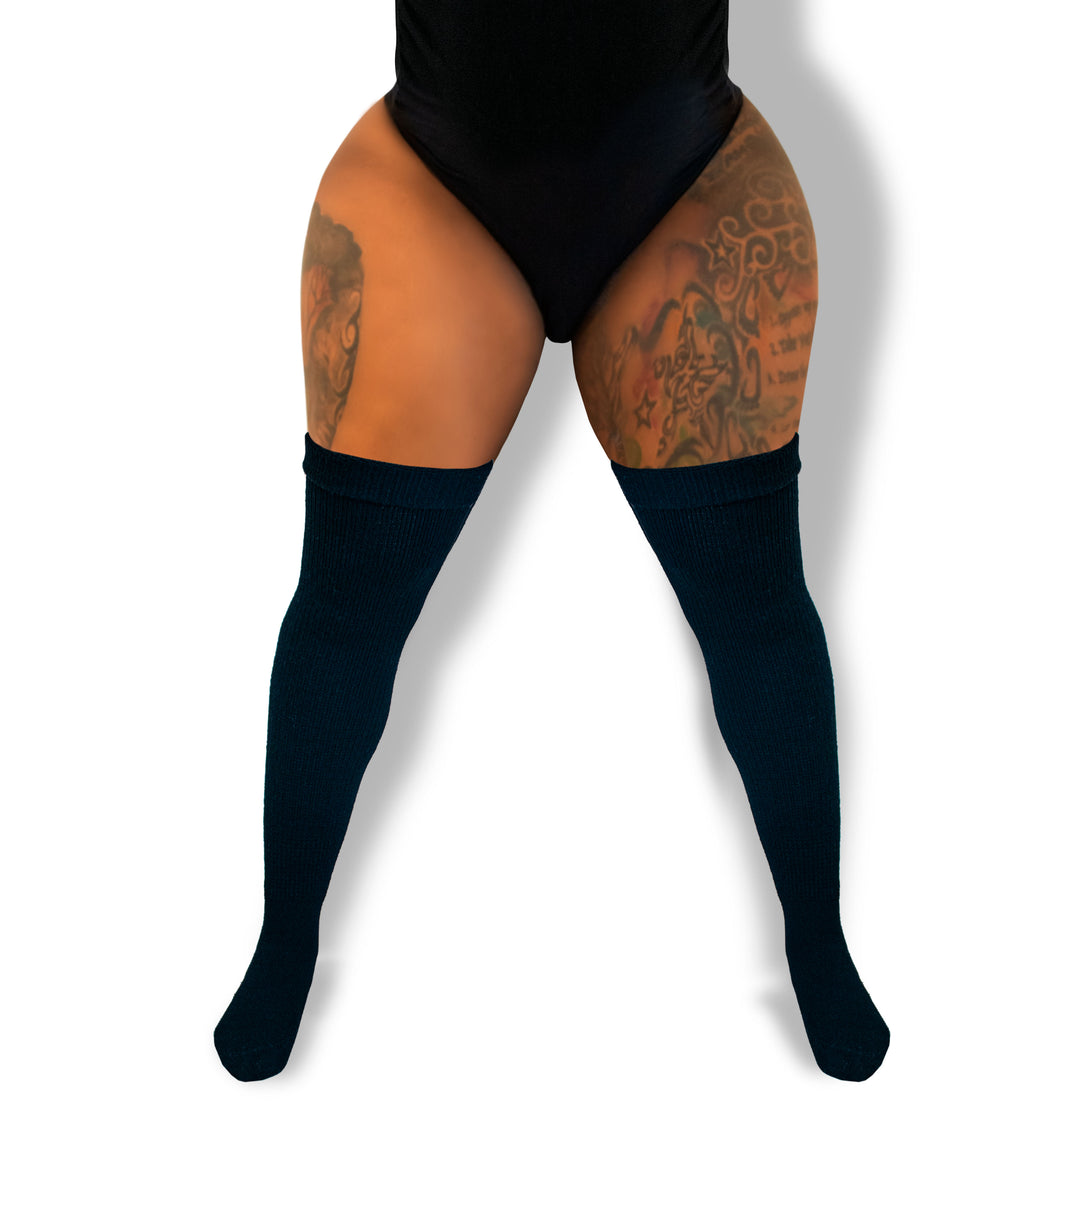 Short and Thick Curvy Thigh-Highs (27 inches)